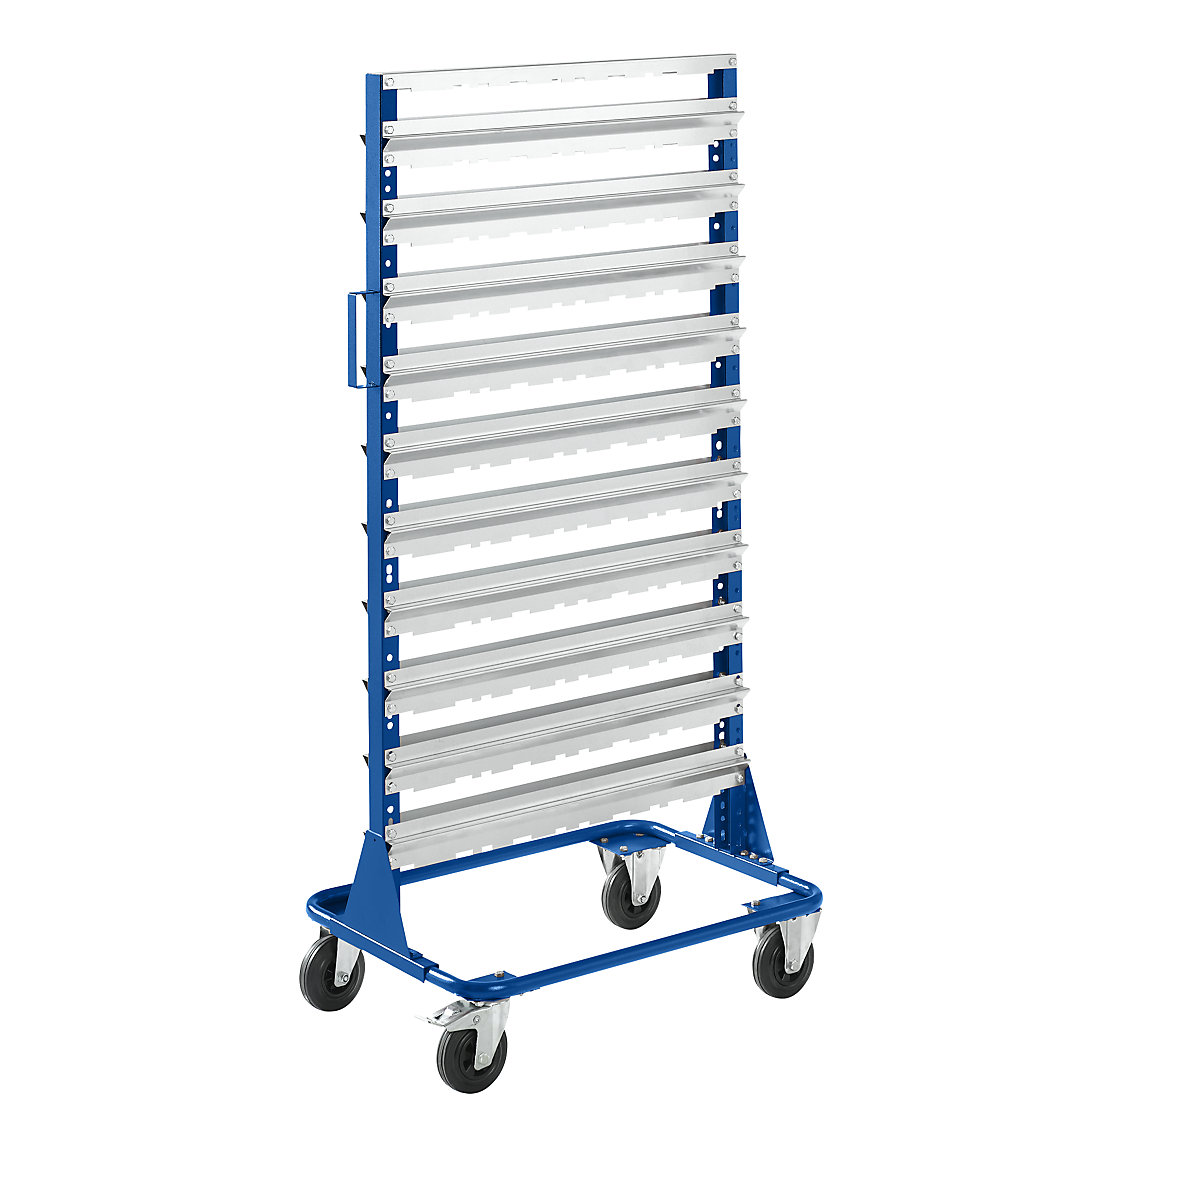 Mobile rack, height 1588 mm, mobile rack for 120 open fronted storage bins, gentian blue-3